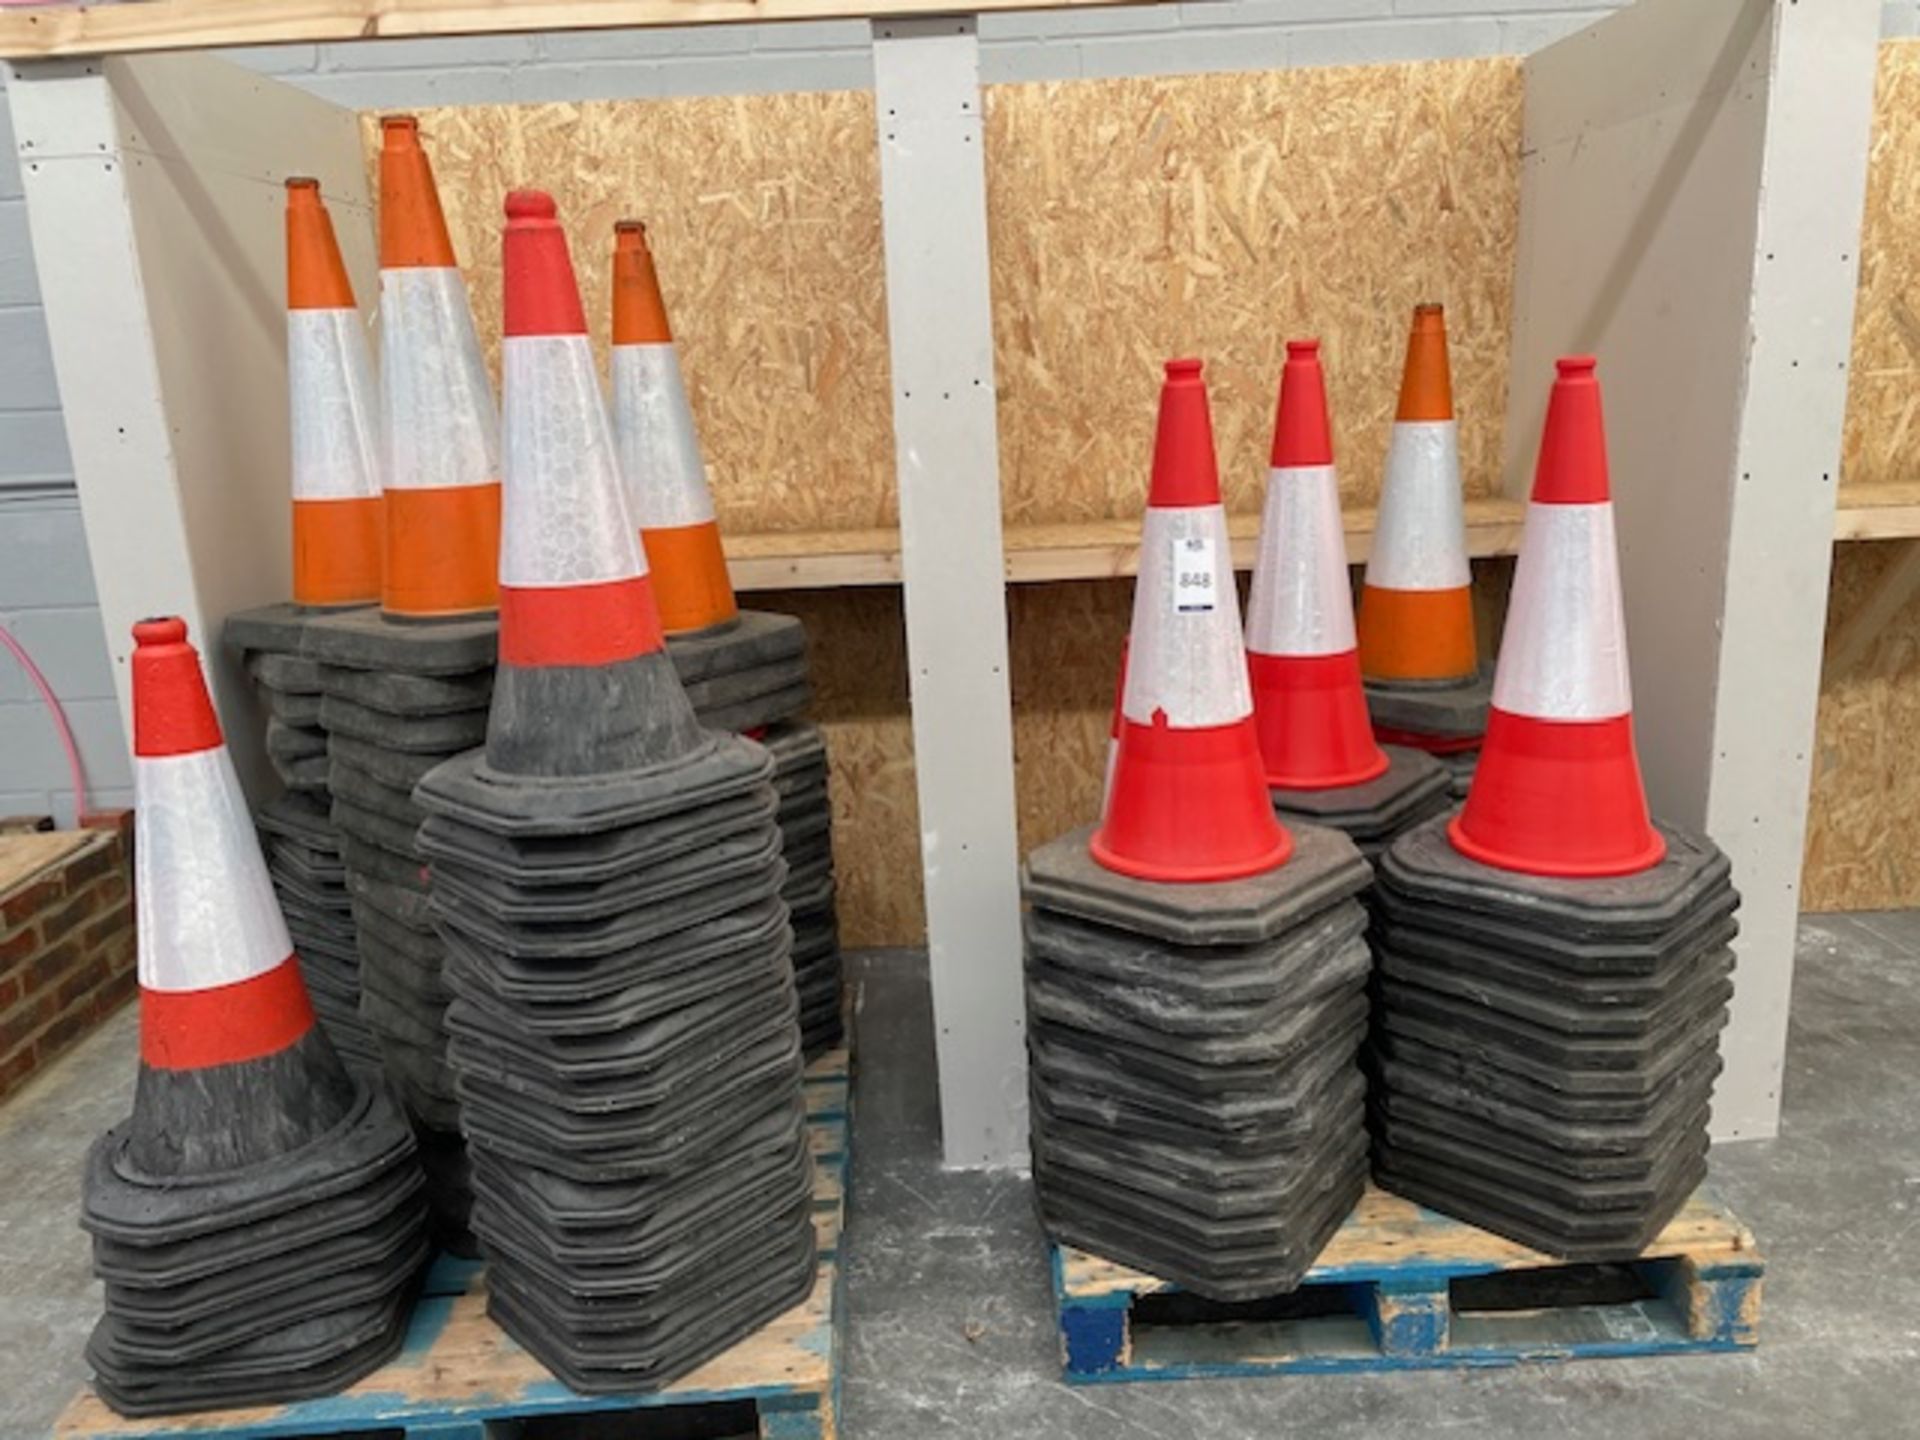 Approximately 150 Road Cones (Location: Harlow. Please Refer to General Notes)